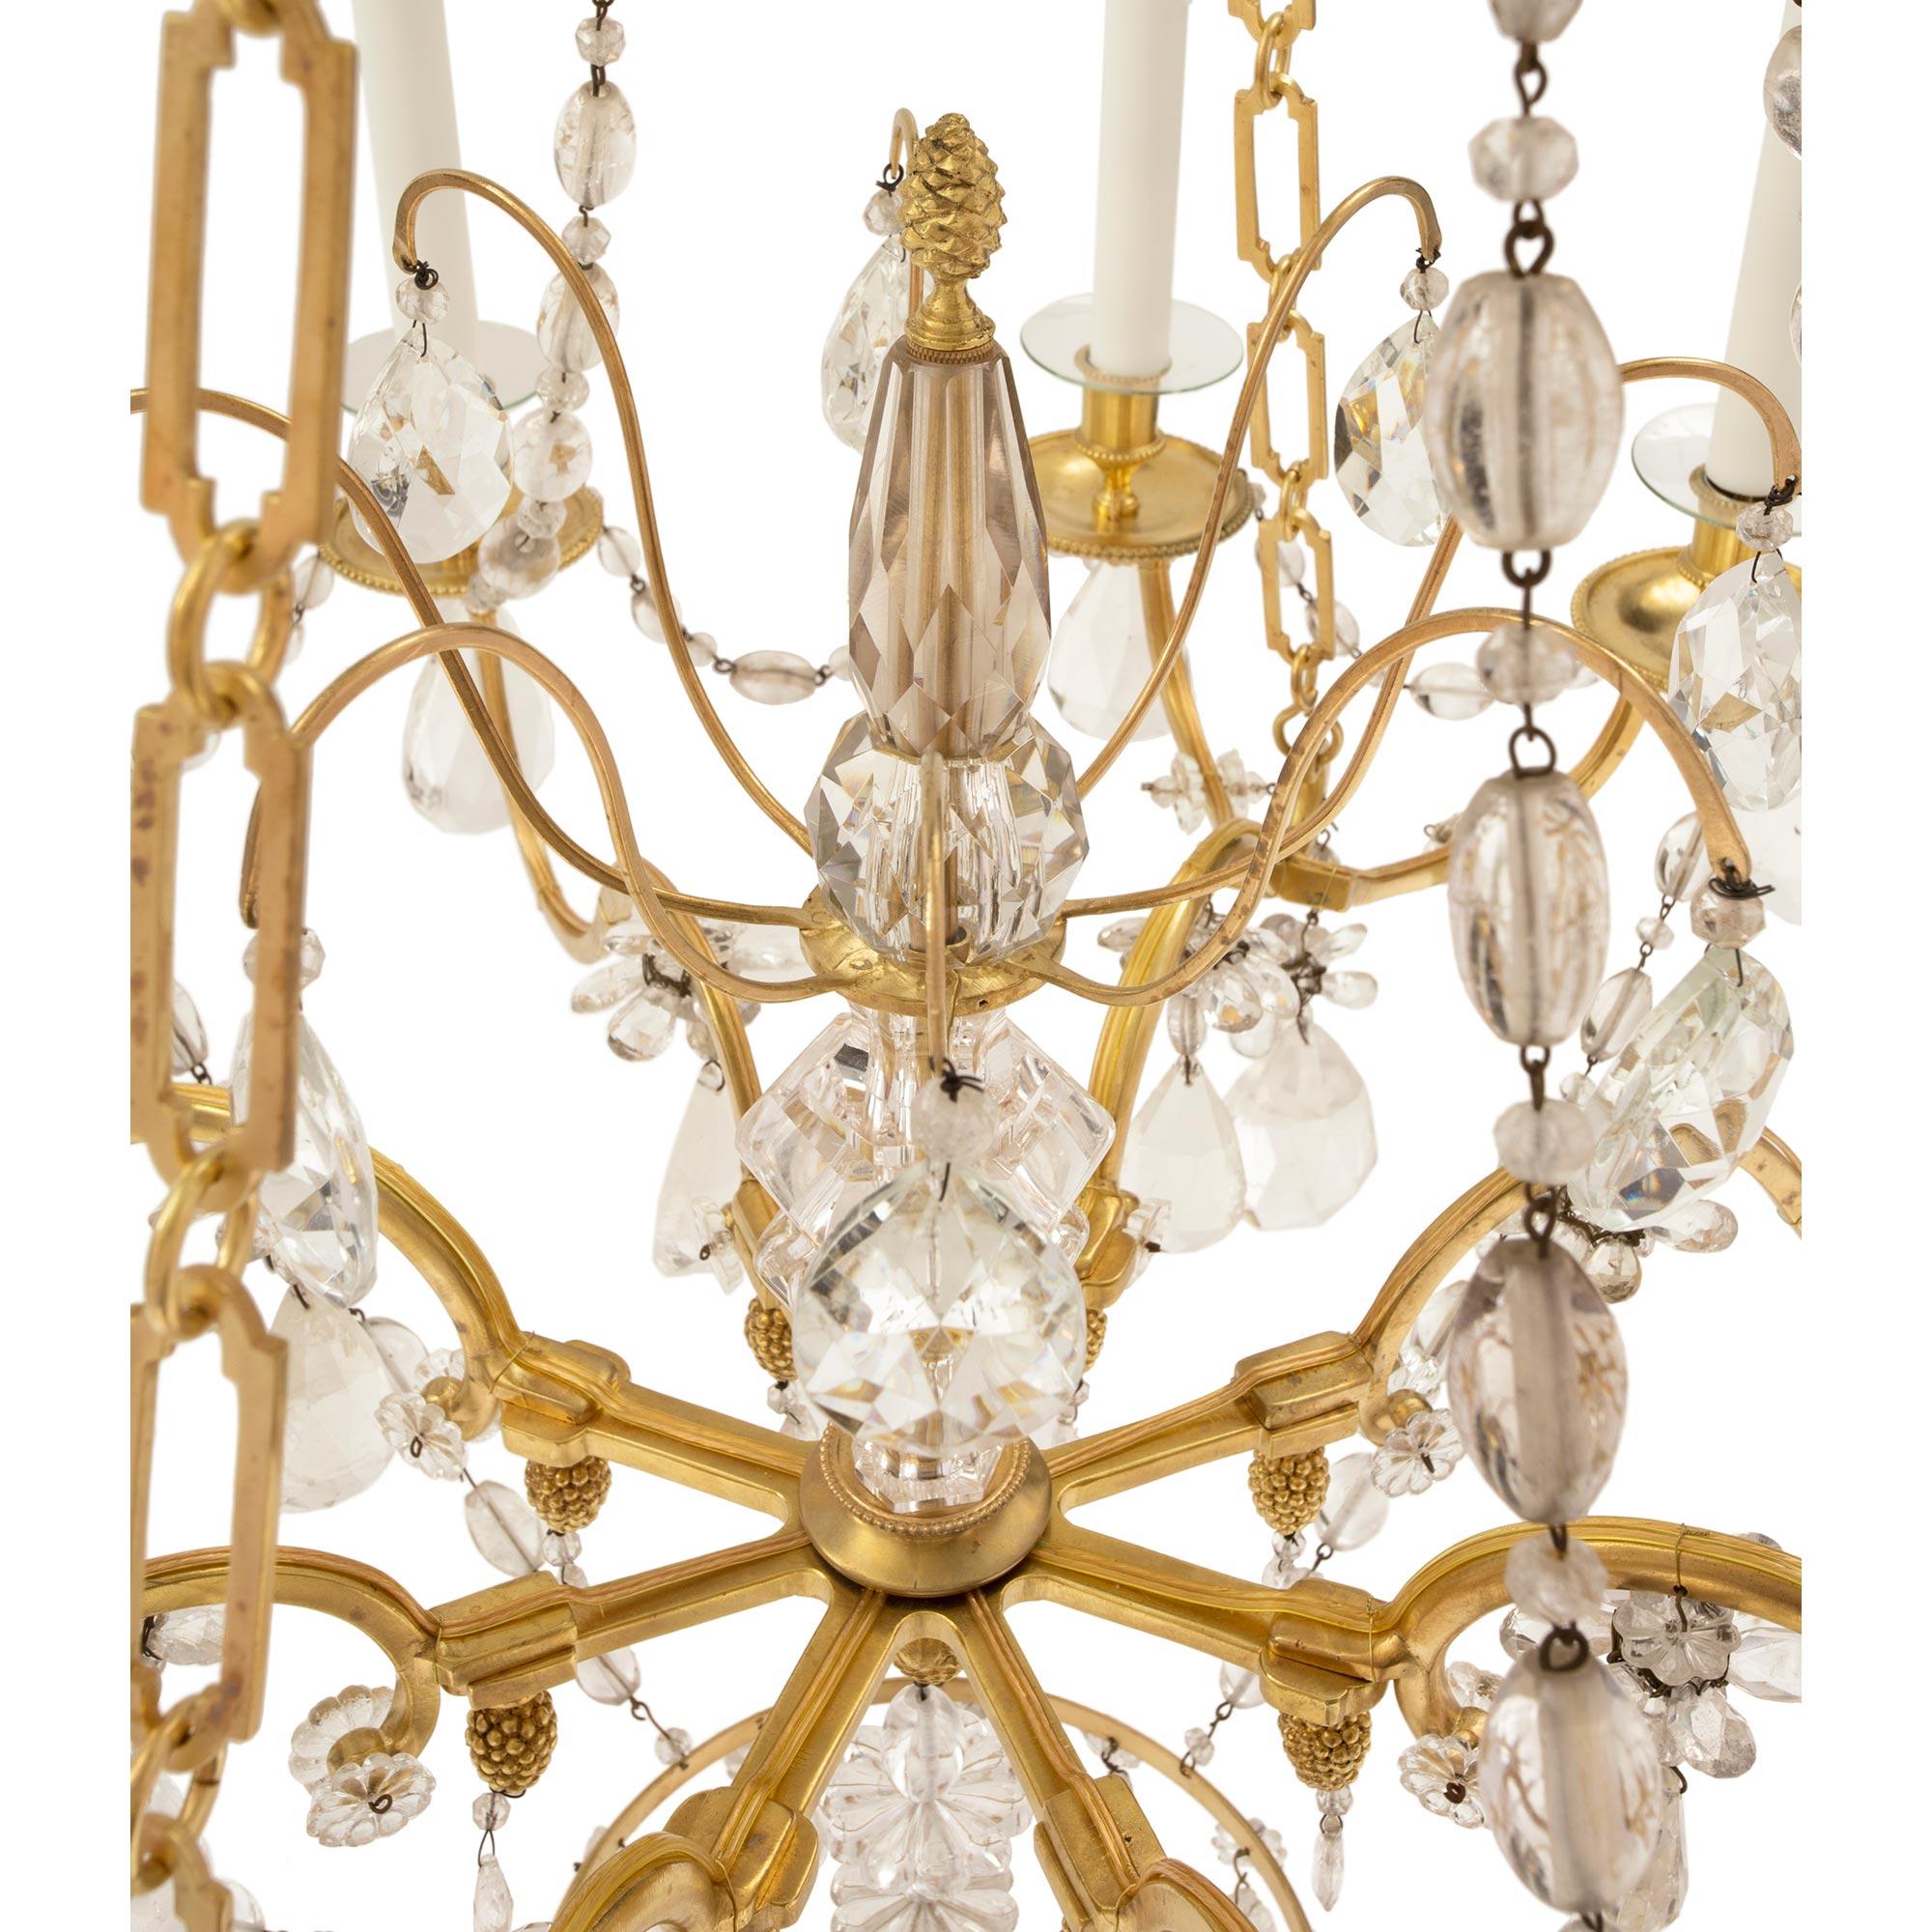 French 19th Century Louis XVI Style Ormolu, Baccarat and Rock Crystal Chandelier For Sale 2